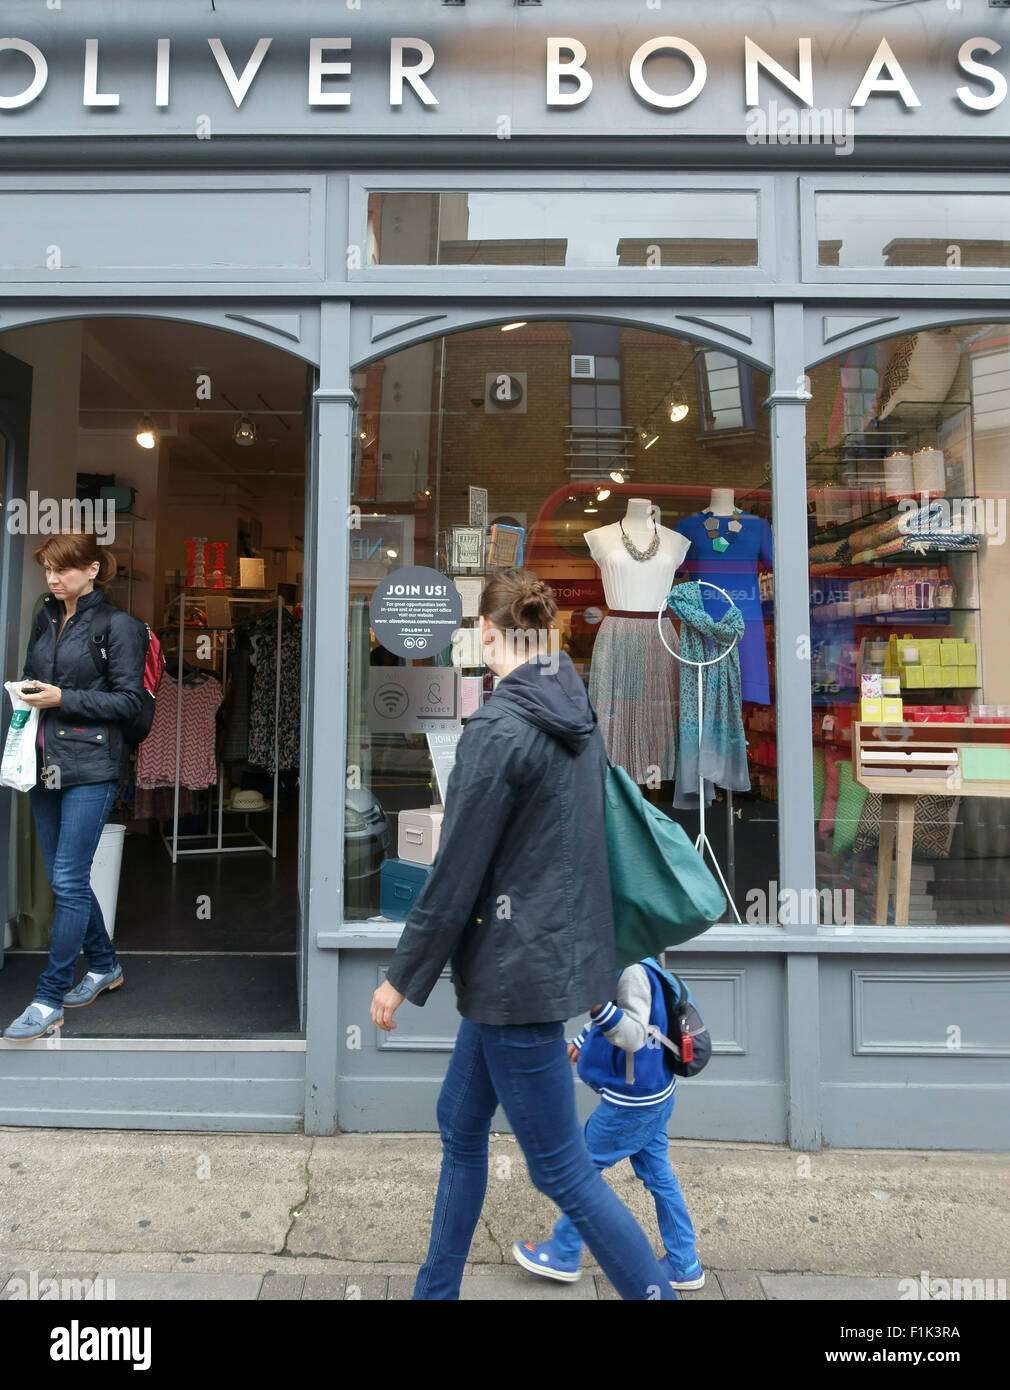 Oliver Bonas Becomes First Uk High Street Chain To Pay Living Wage